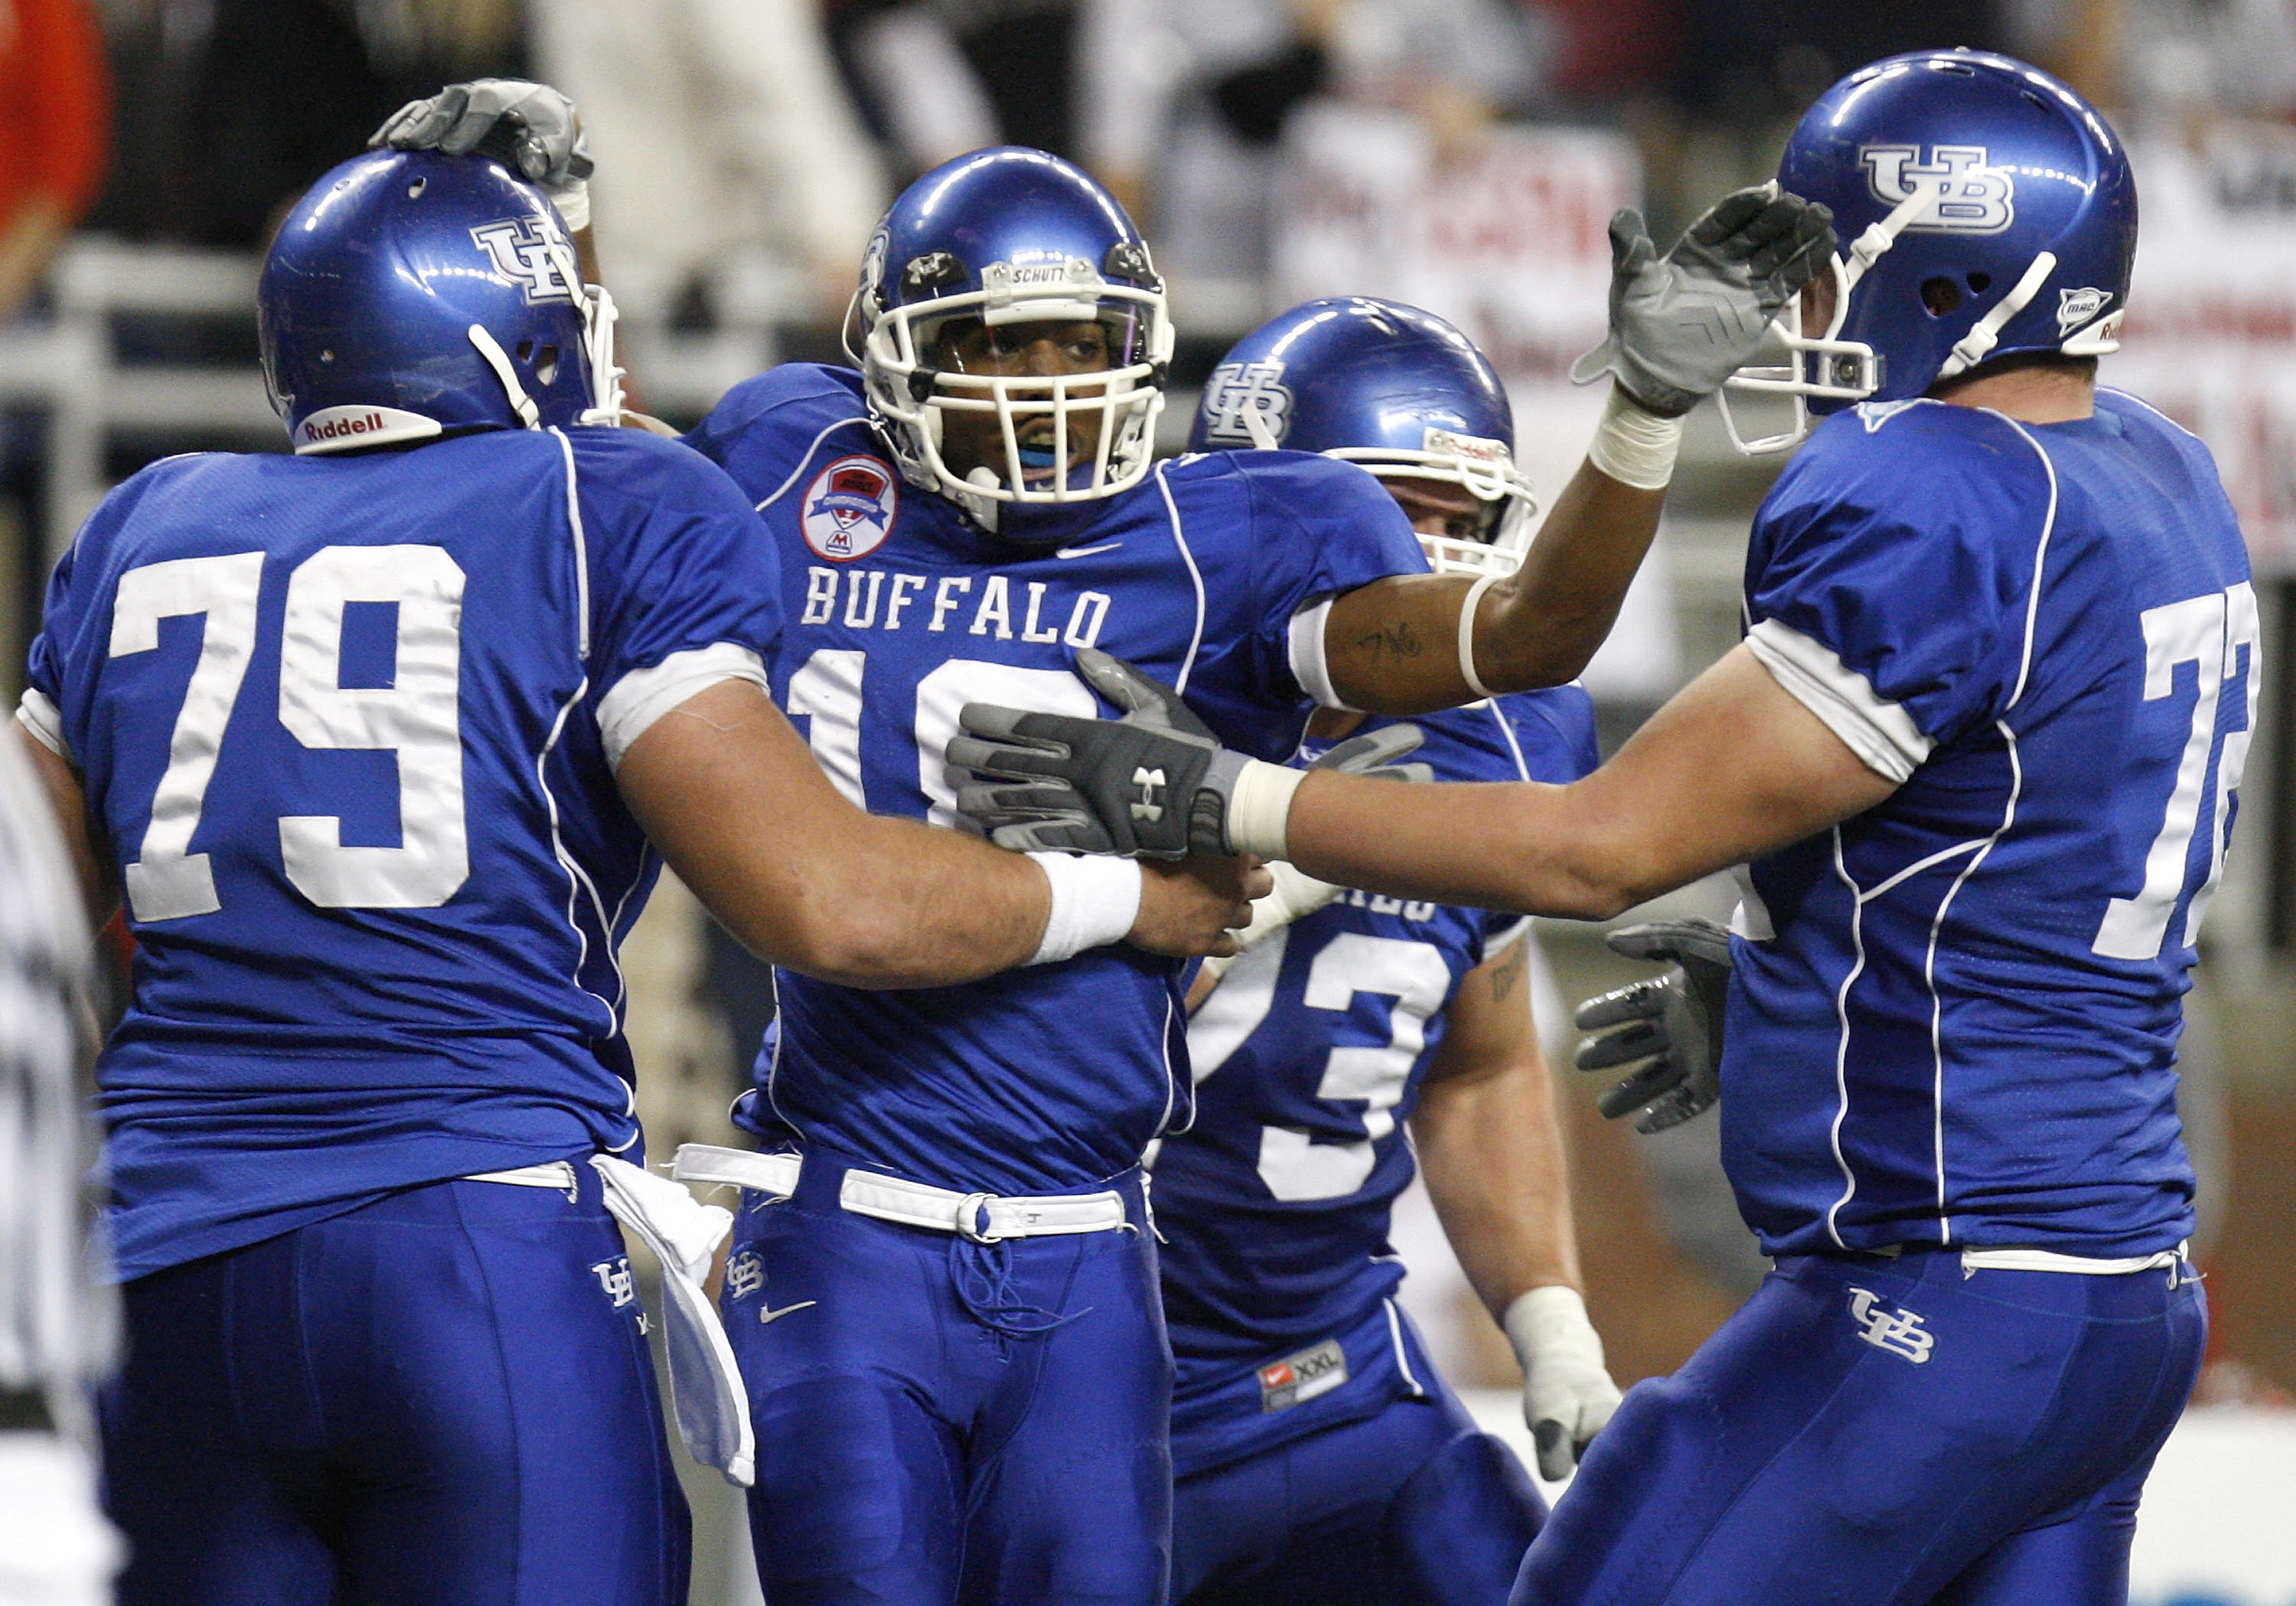 DETROIT - DECEMBER 05: James Starks #19 of the Buffalo Bulls celebrates a fourth quarter touchdown with Chris Lauzze #79, Andrew West #72 and Peter Bittner #73 while playing the Ball State Cardinals during the second quarter of the MAC Championship game o